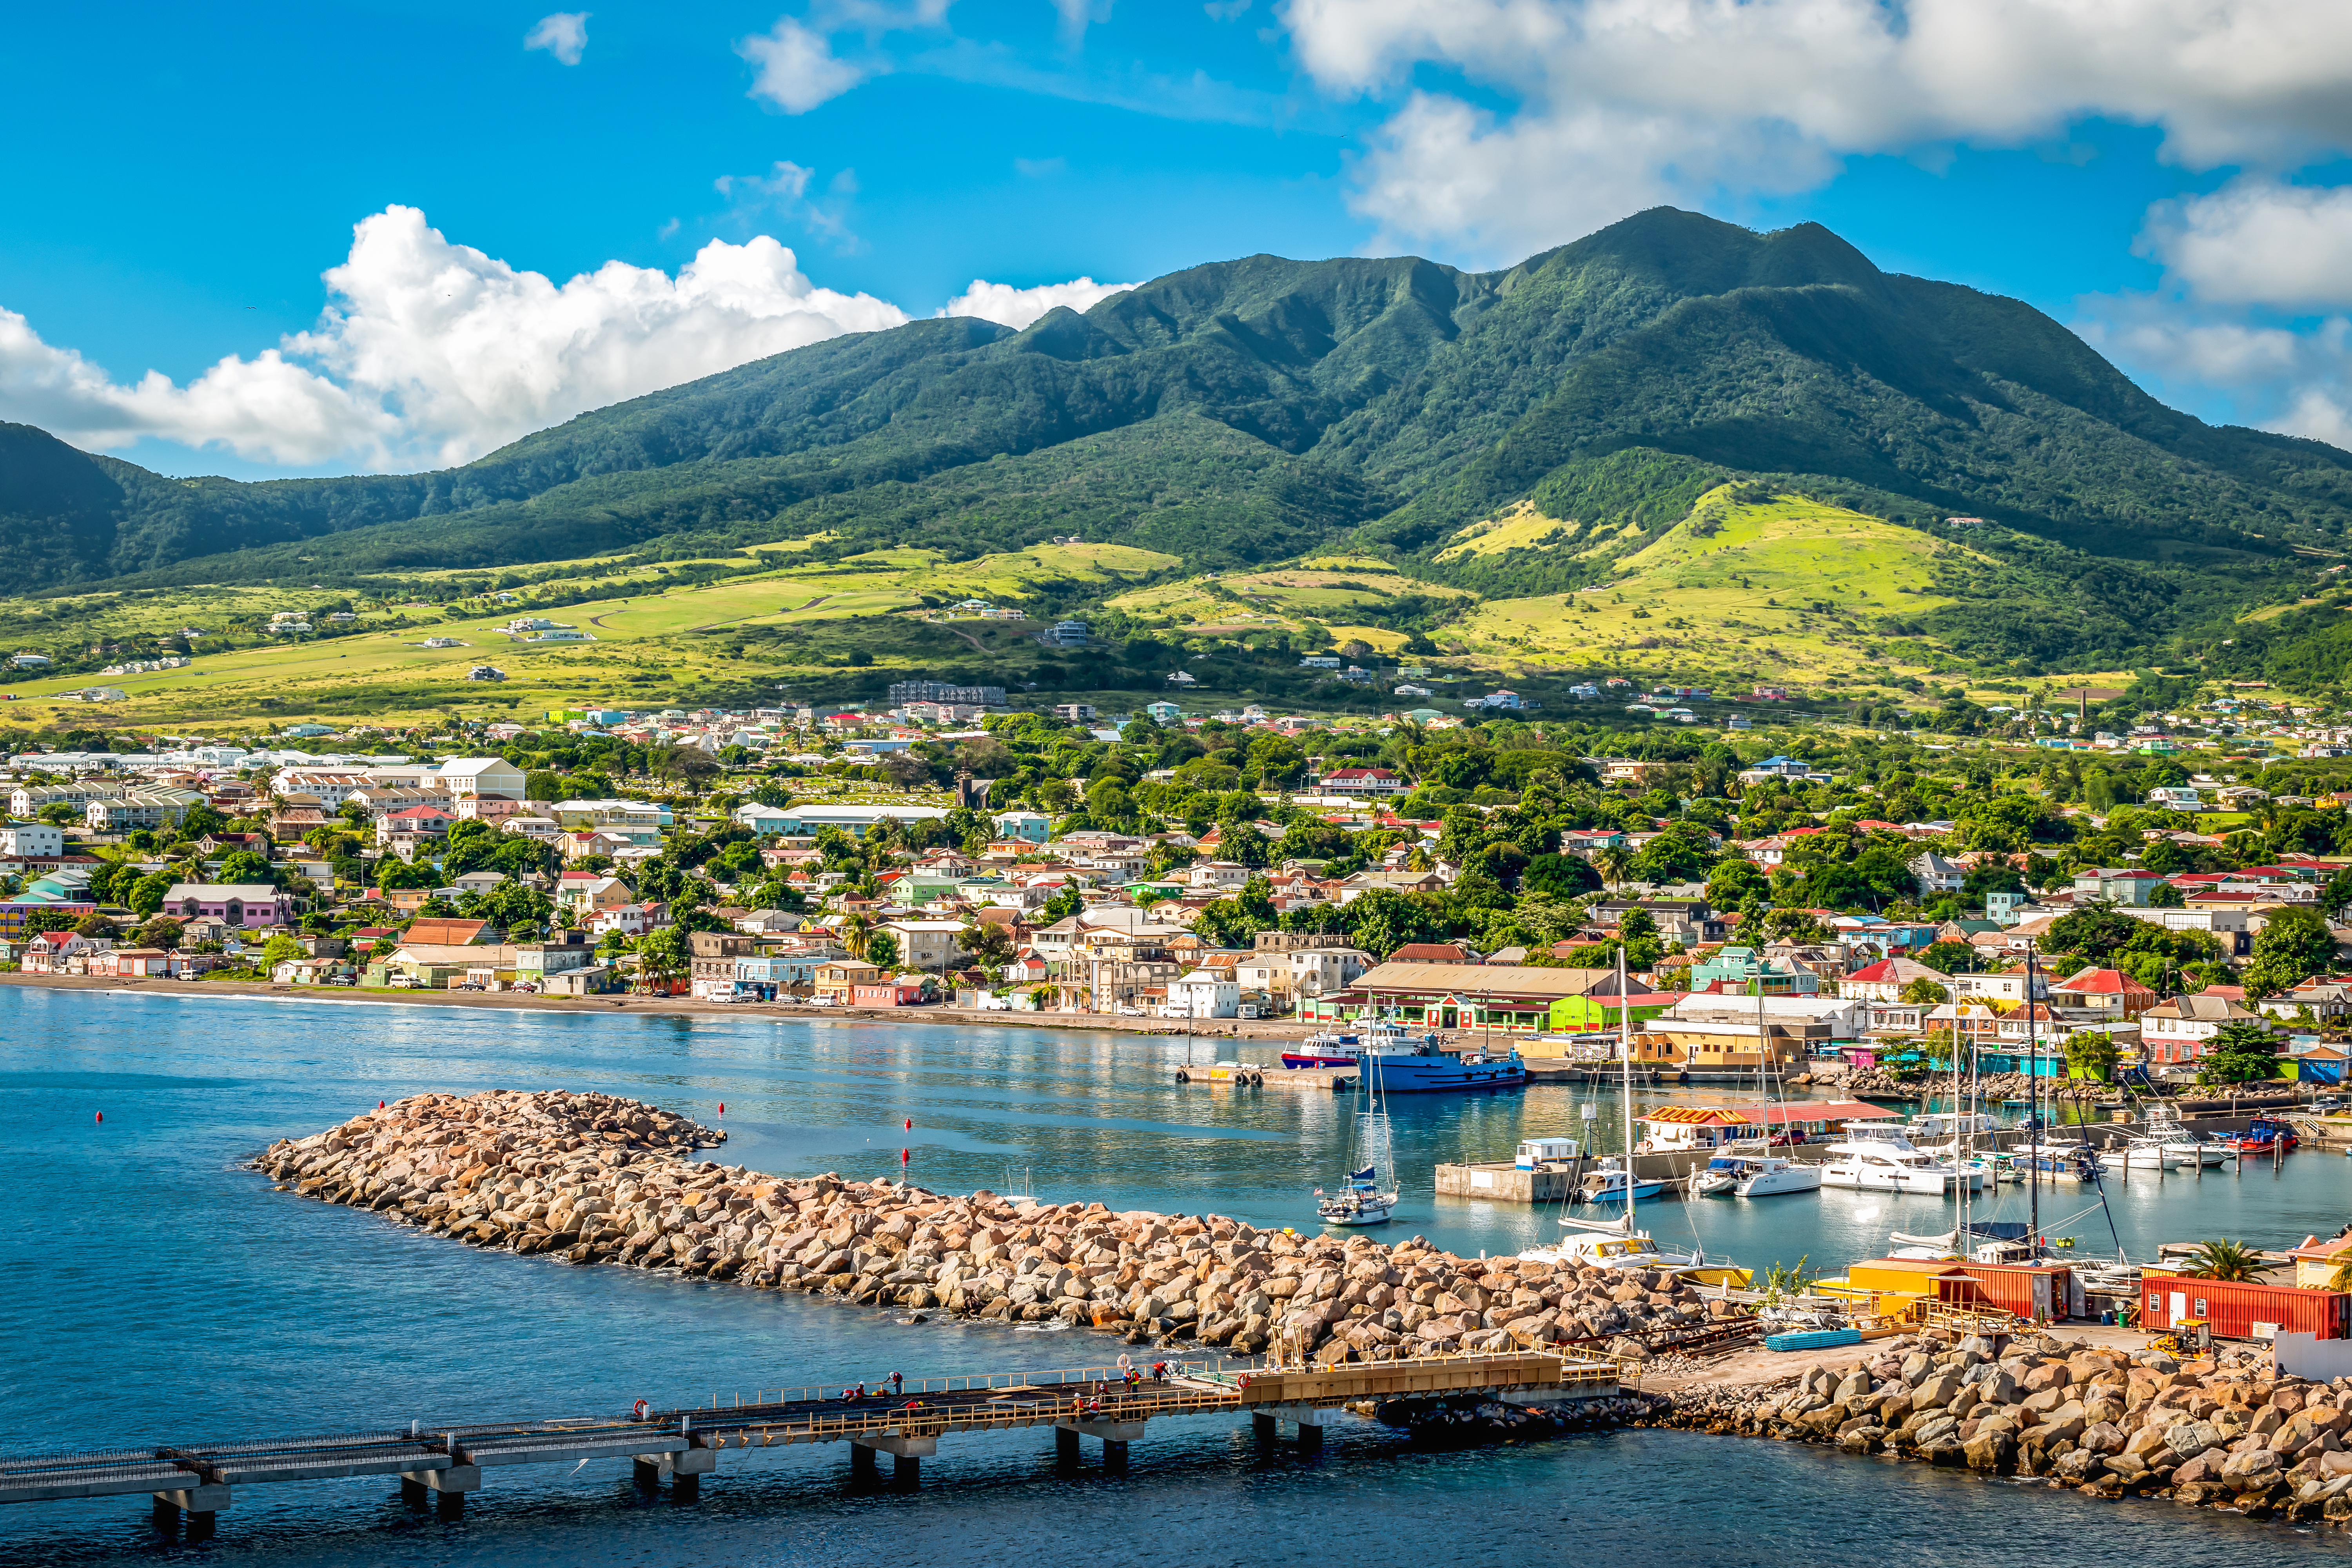 St. Kitts and Nevis citizenship allows you to live on the island